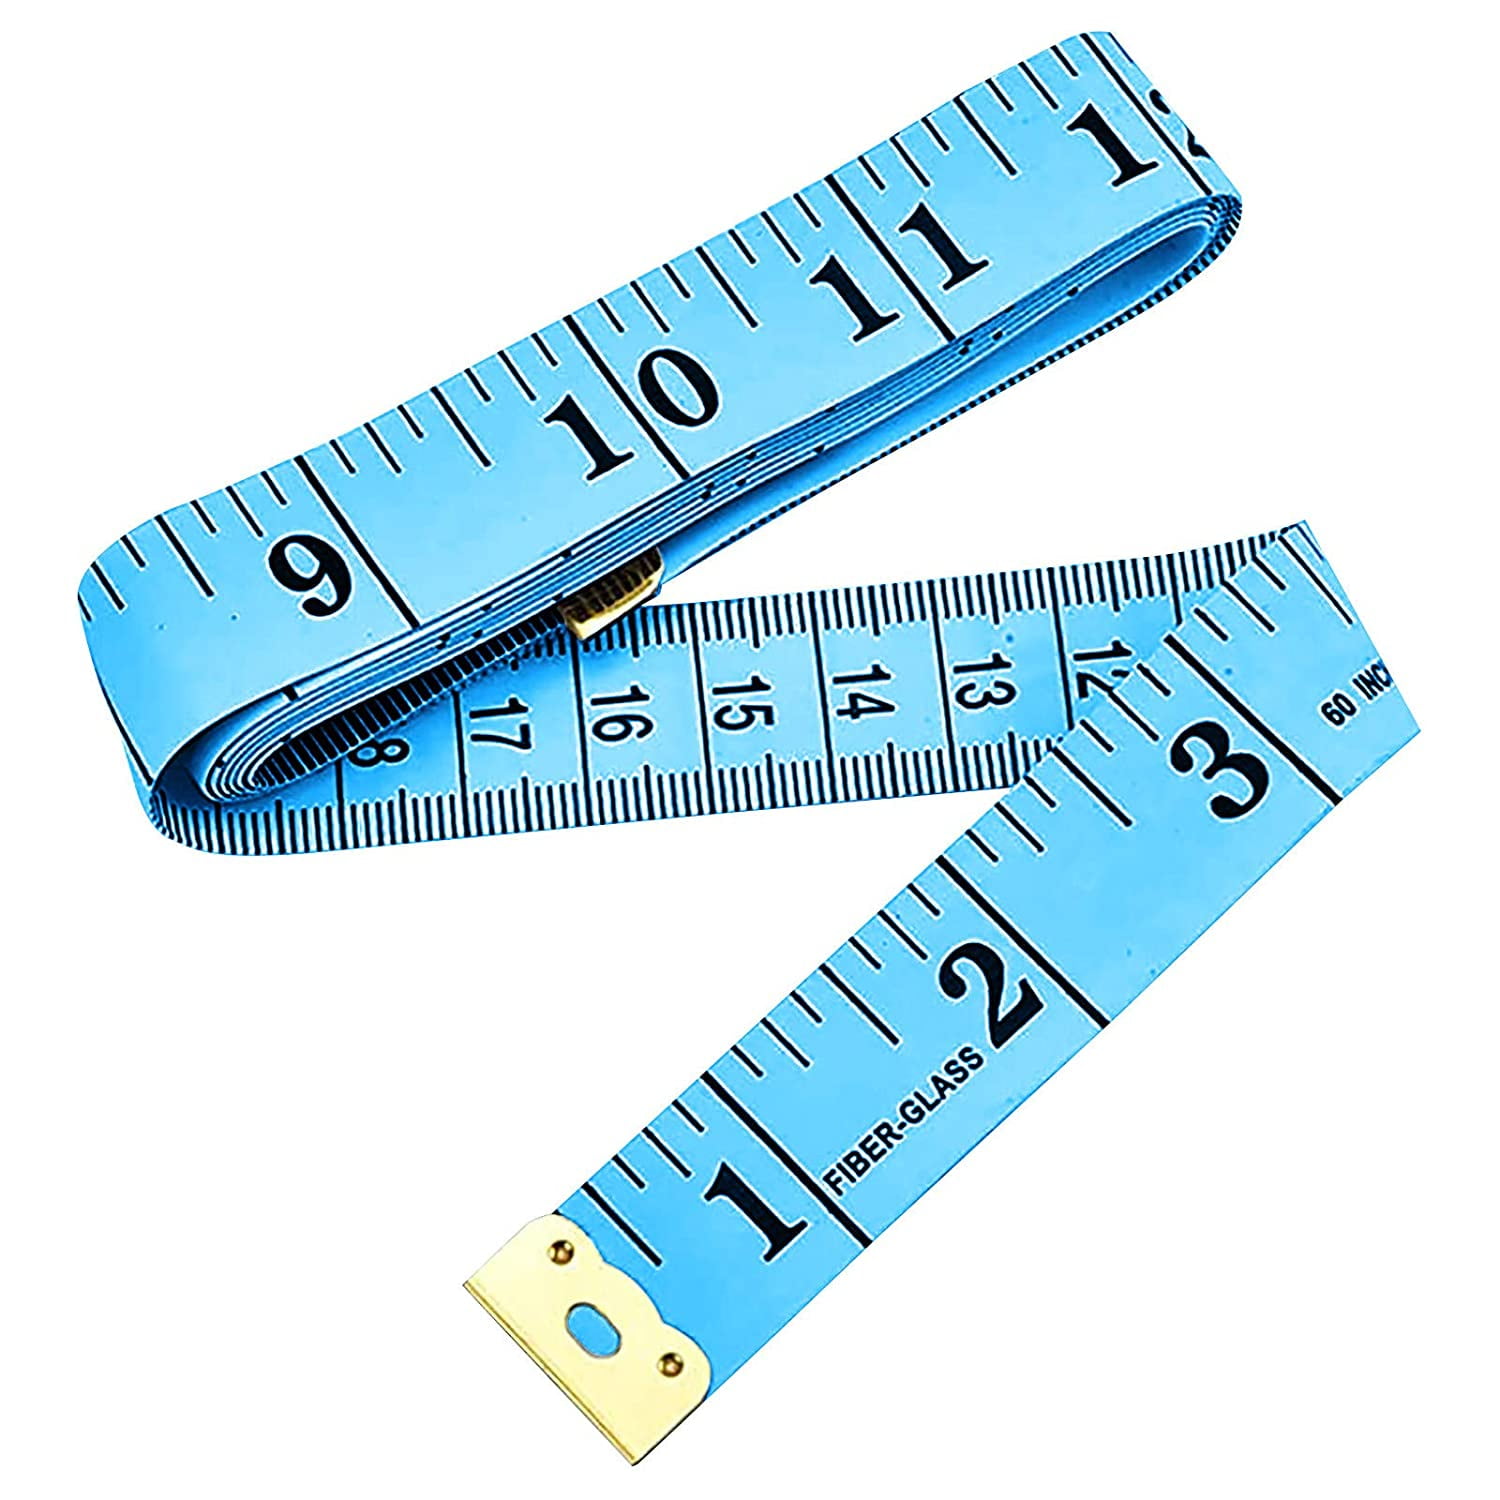 60 INCH SOFT TAPE MEASURE — YARNS | PATTERNS | ACCESSORIES | KITS + MORE